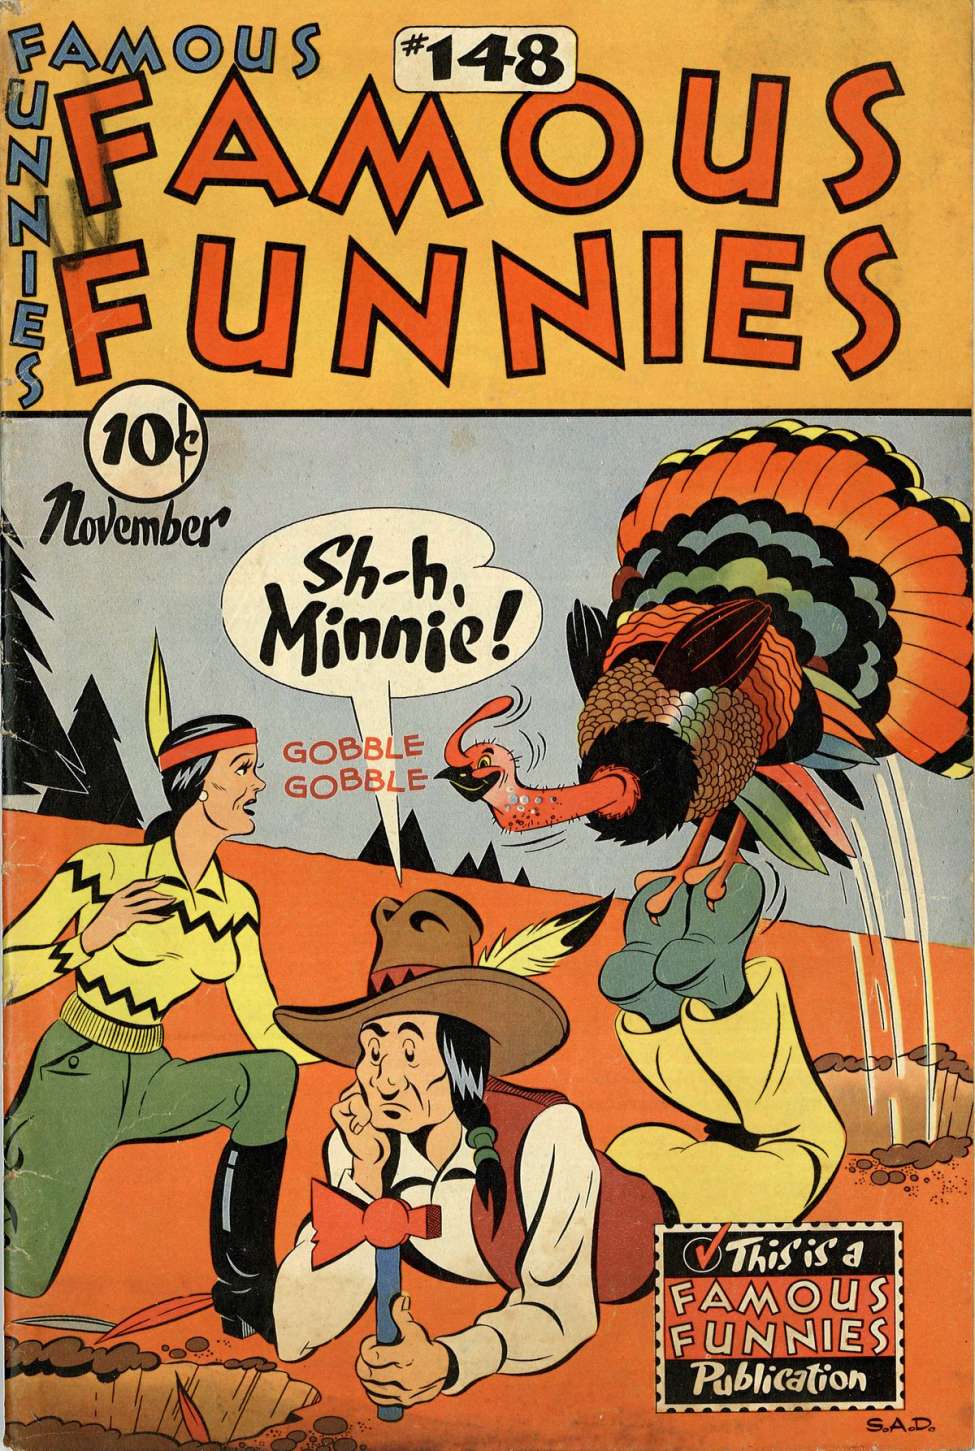 Book Cover For Famous Funnies 148